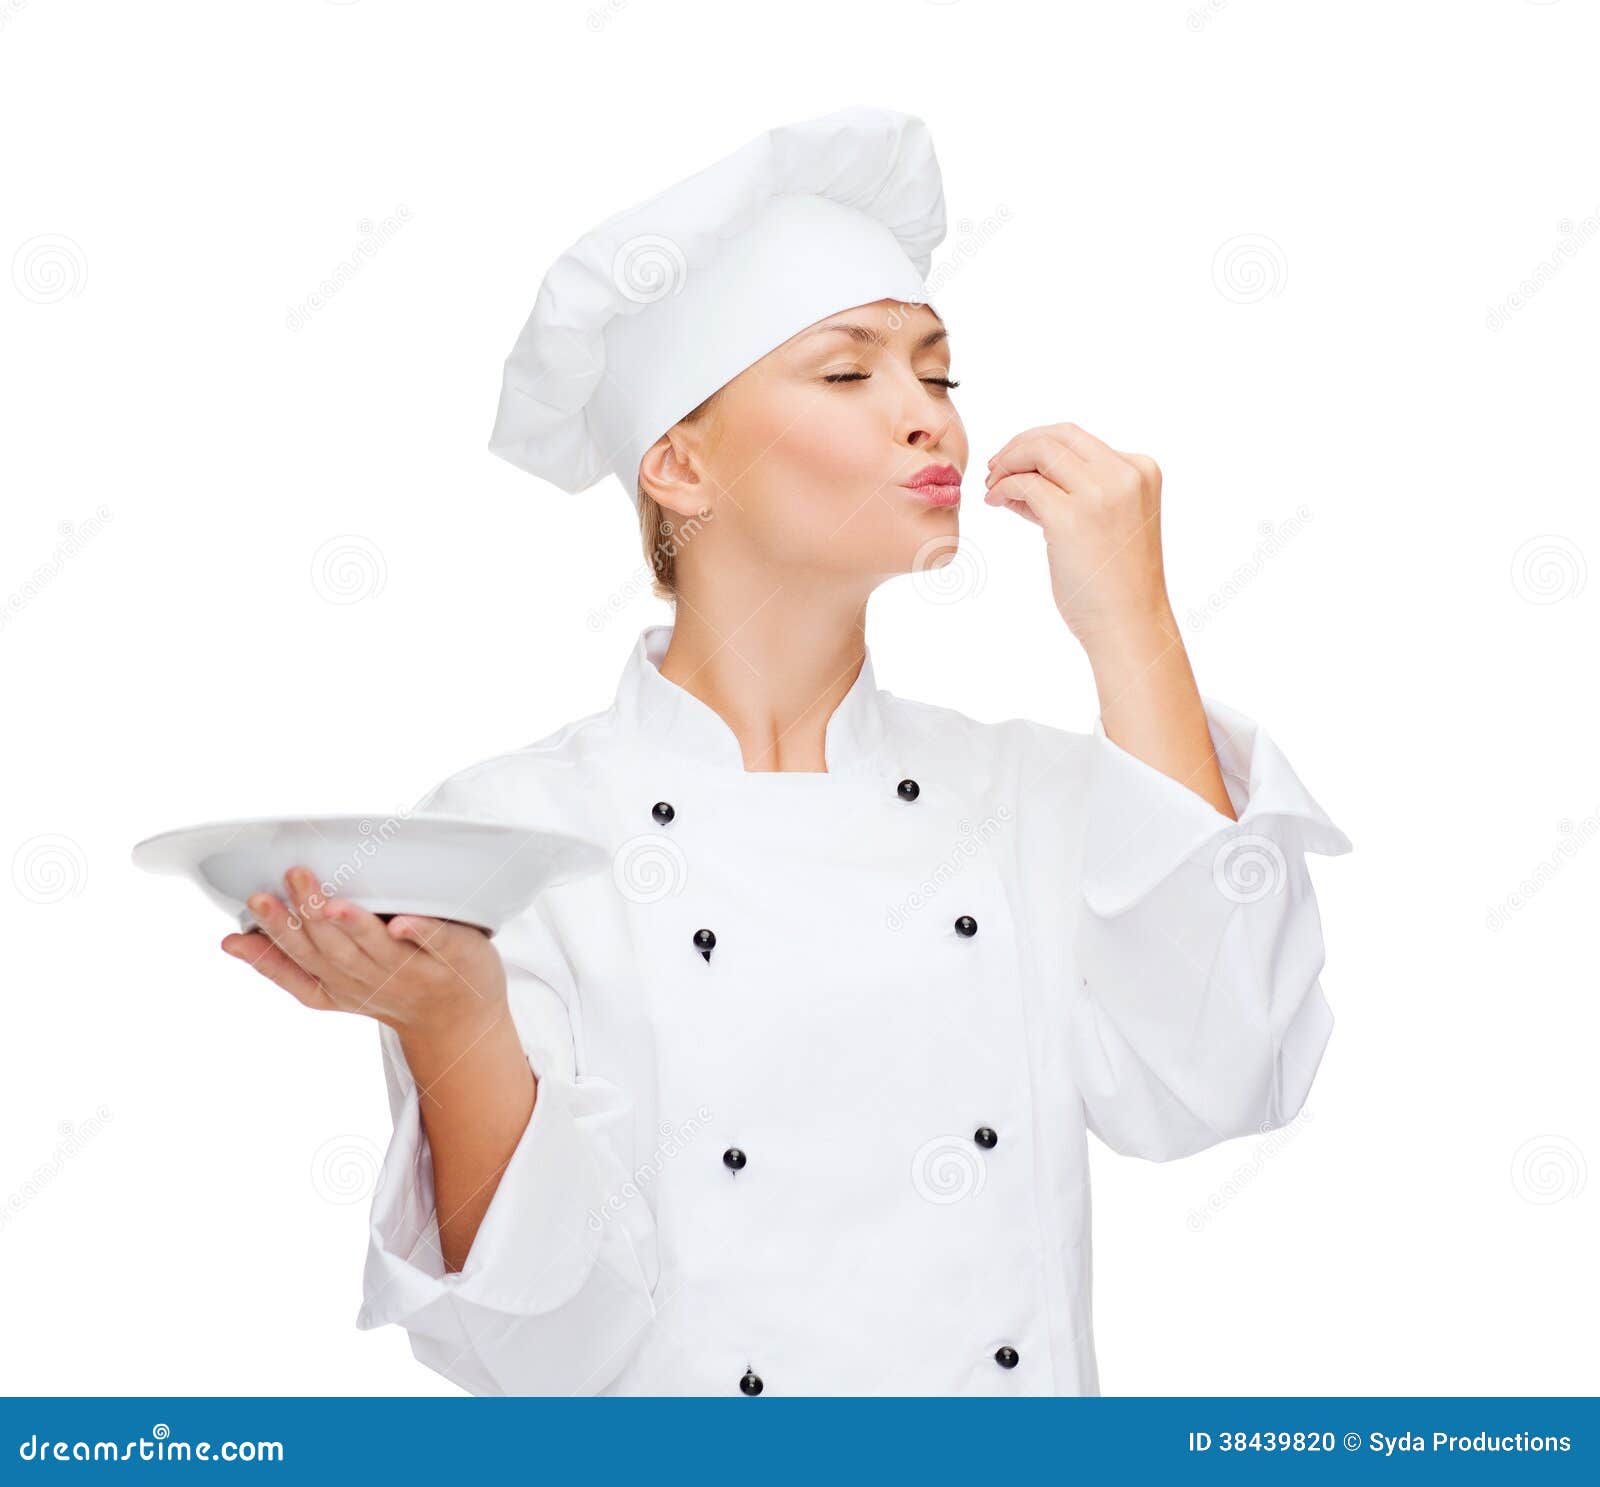 female-chef-plate-showing-delicious-sign-38439820.jpg